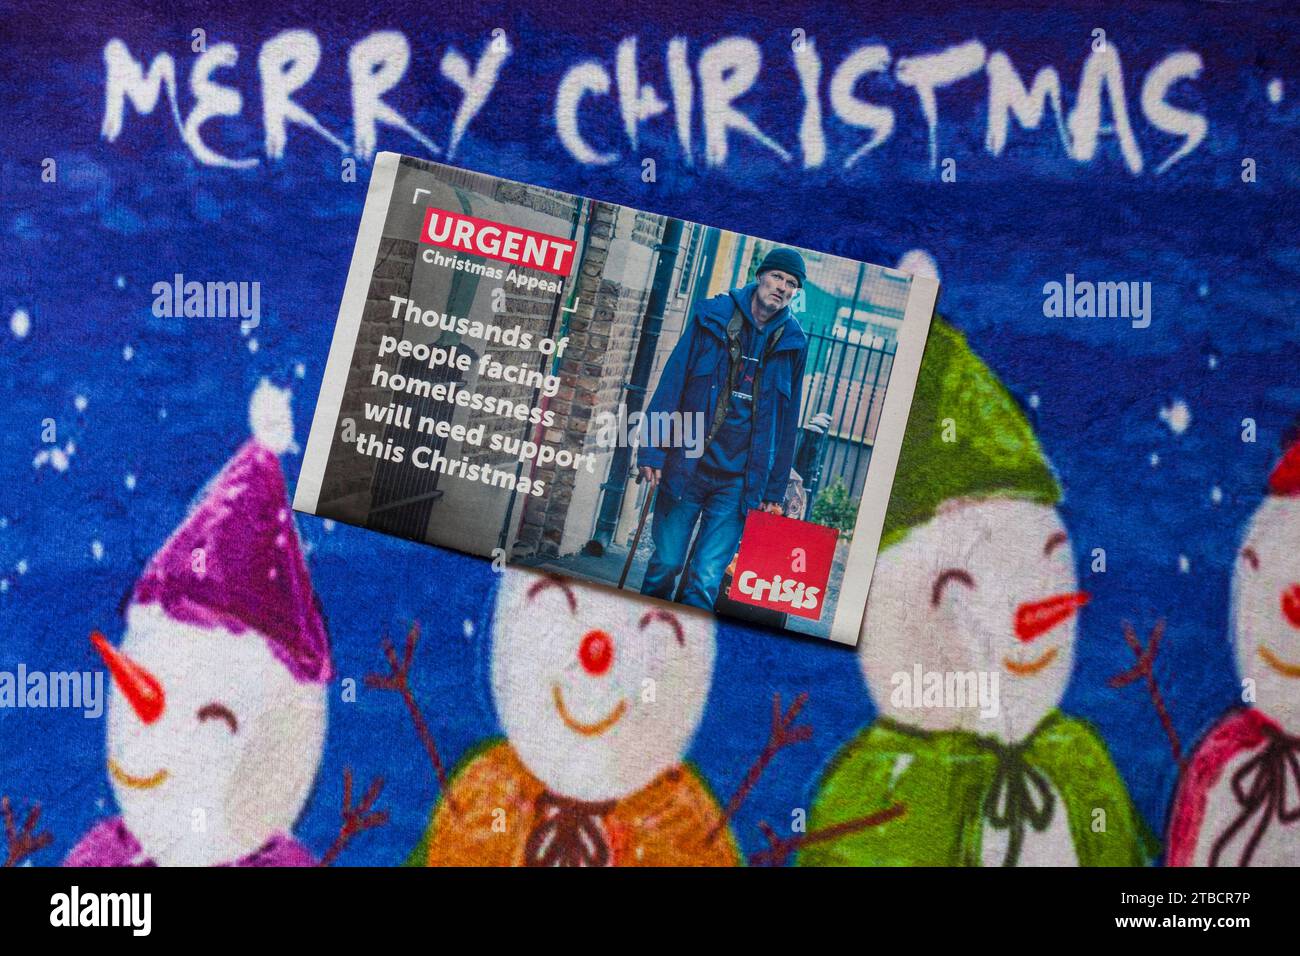 Post on Christmas mat, Merry Christmas - charity appeal from Crisis - thousands of people facing homelessness will need support this Christmas Stock Photo